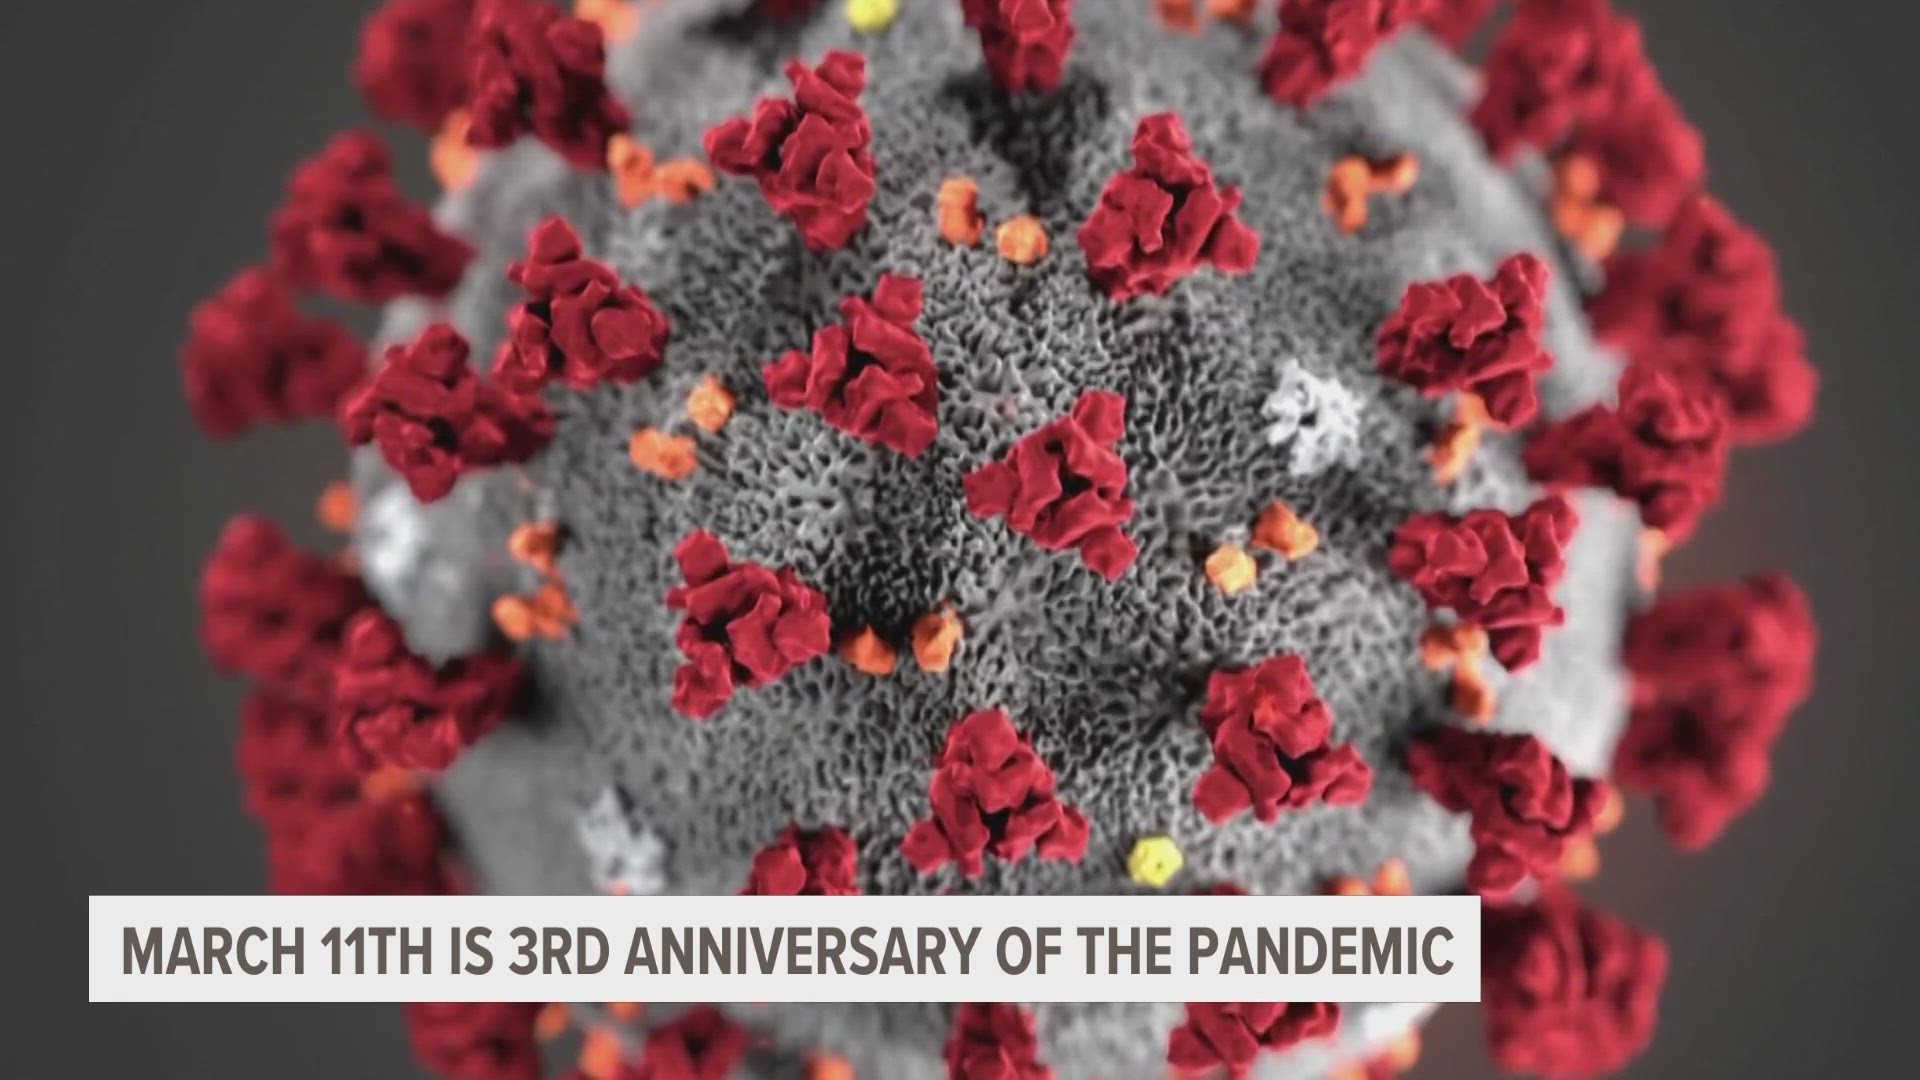 On March 11th, 2020, the World Health Organization declared COVID-19 a global pandemic.